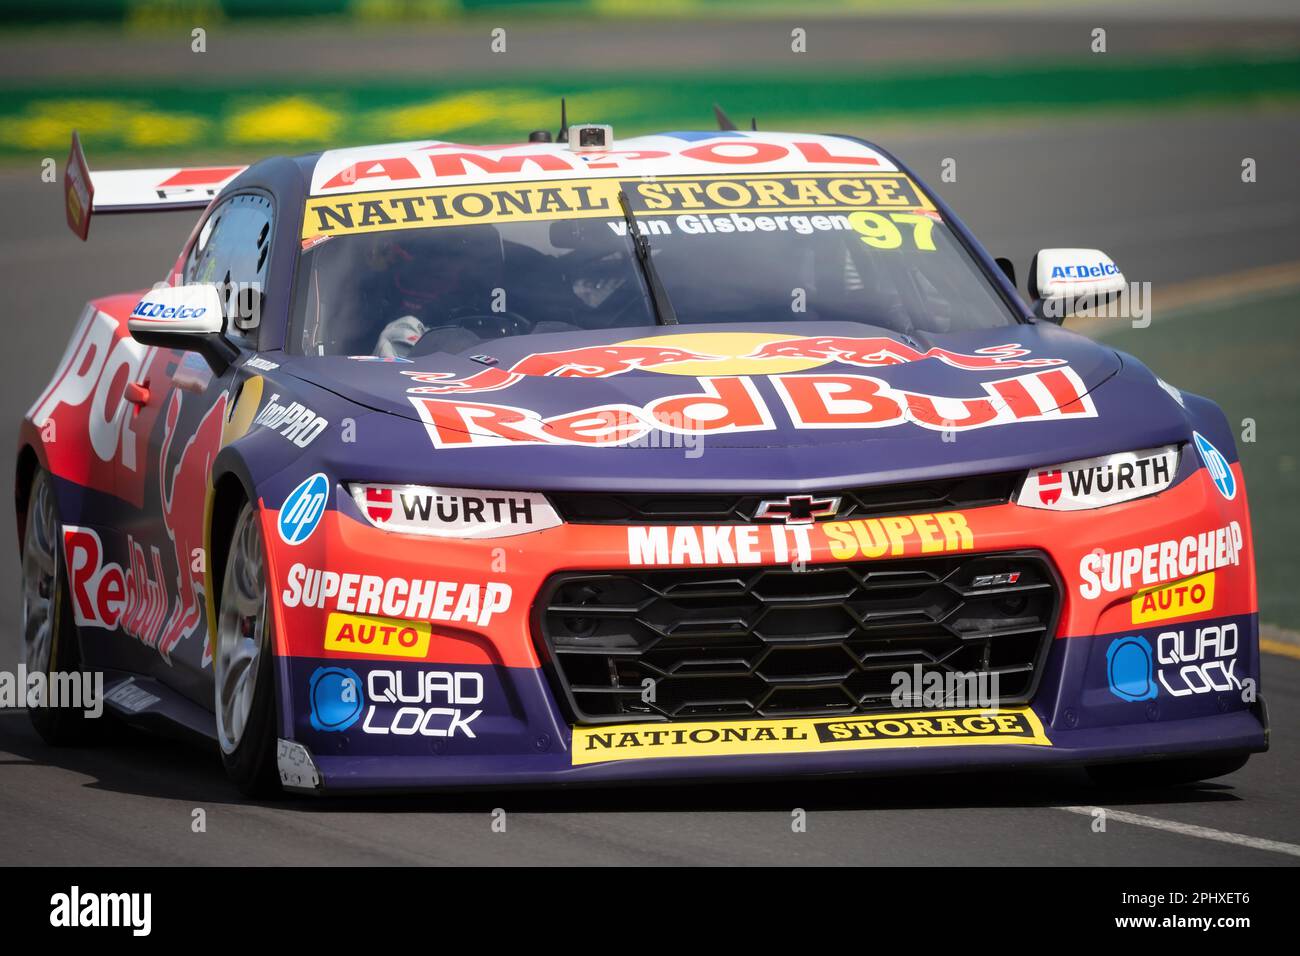 Melbourne, Australia, 30 March, 2023. Shane van Gisbergen (97) driving for Triple Eight Race Engineering during The Australian Formula One Grand Prix on March 30, 2023, at The Melbourne Grand Prix Circuit in Albert Park, Australia. Credit: Dave Hewison/Speed Media/Alamy Live News Stock Photo